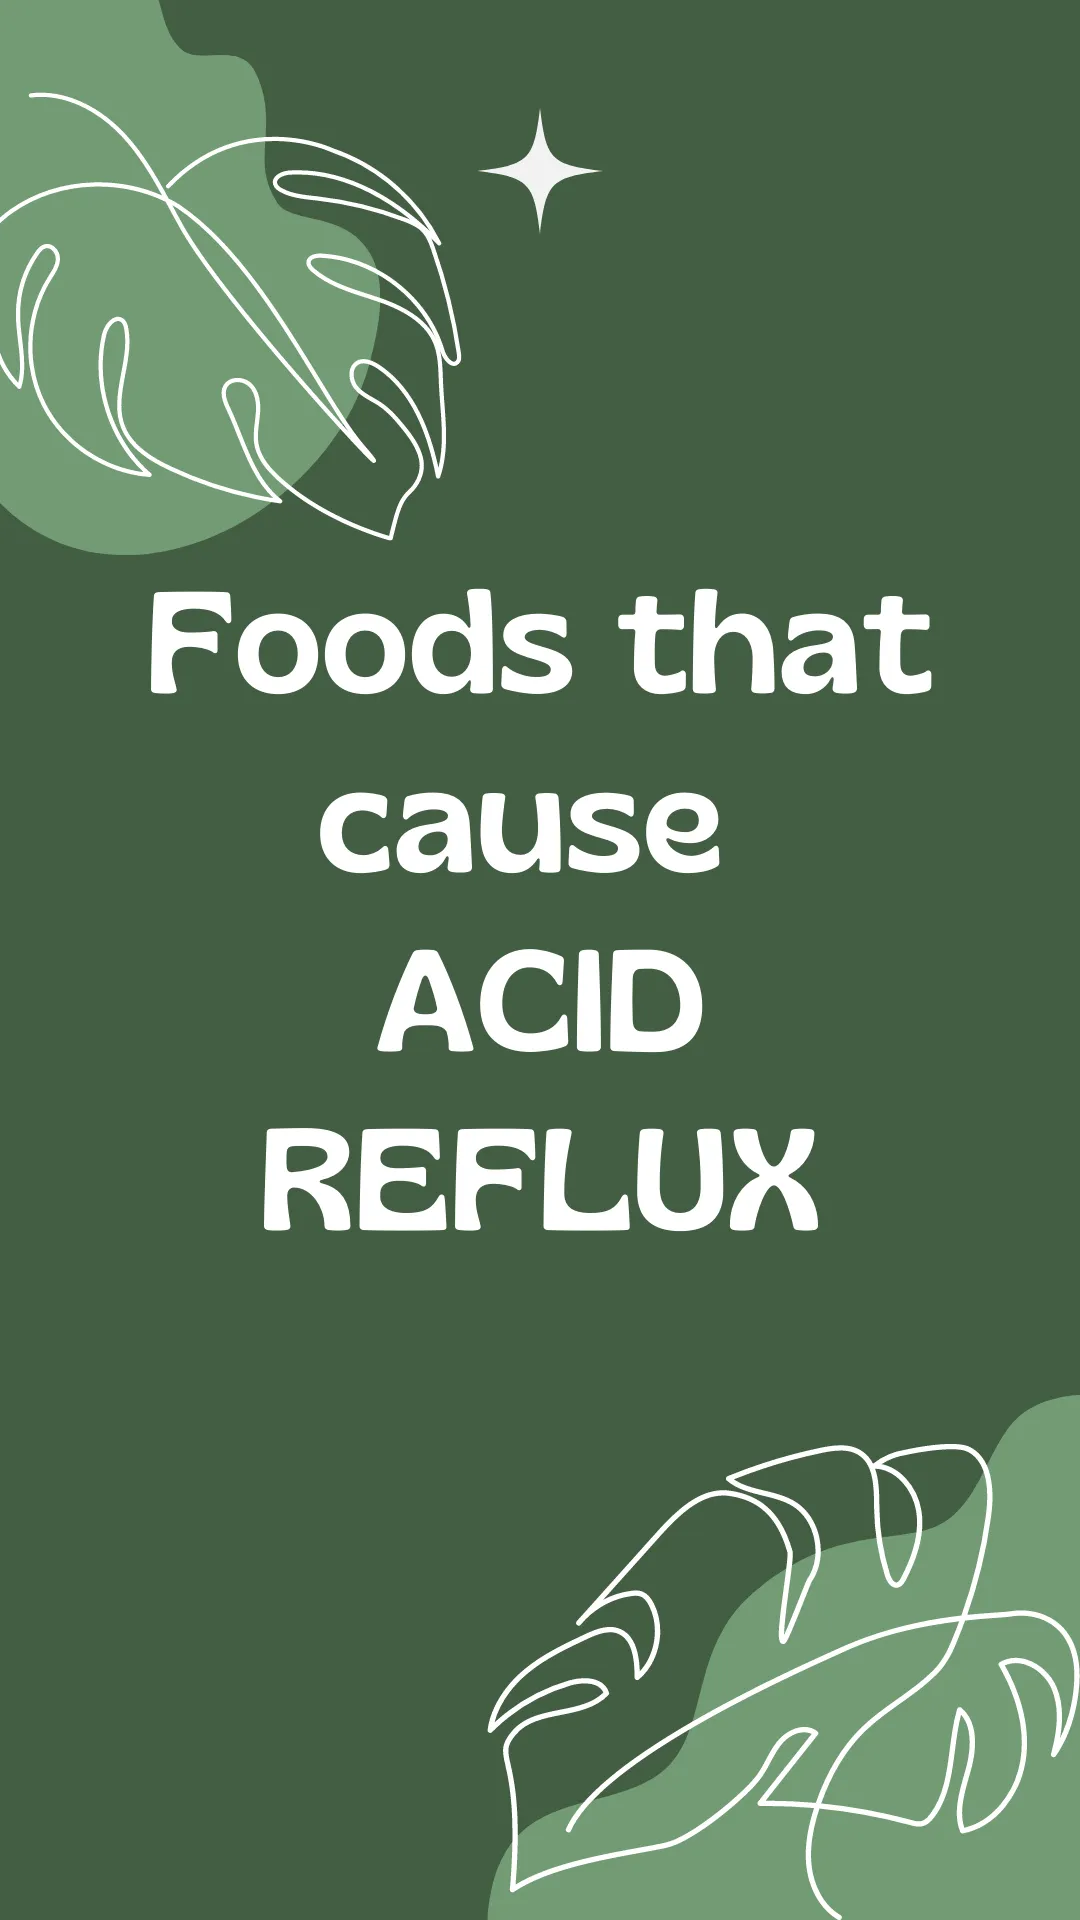 Foods that can cause ACID REFLUX